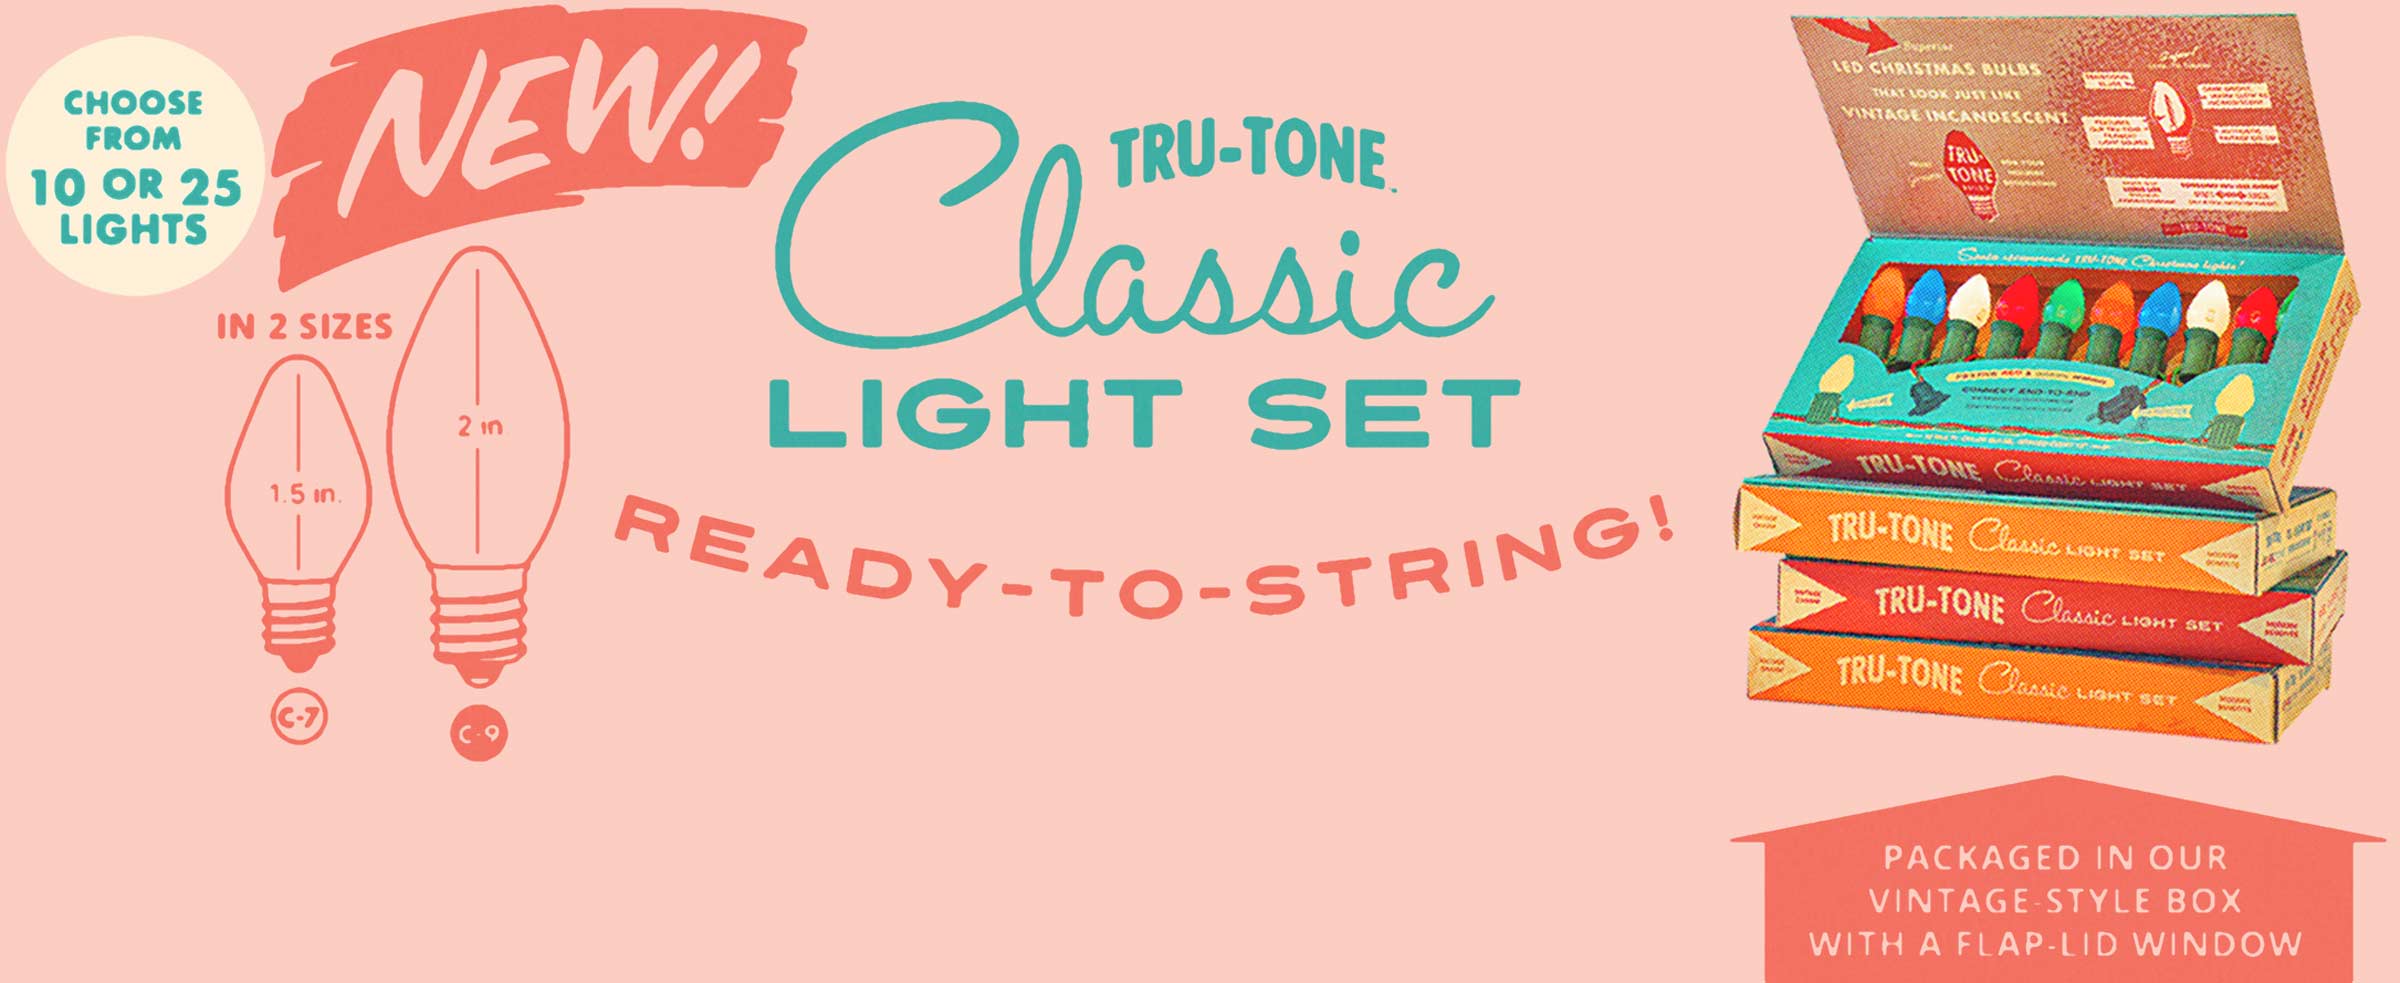 Tru-Tone Classic Light Sets in vintage style packaging. C7 and C9 sizes